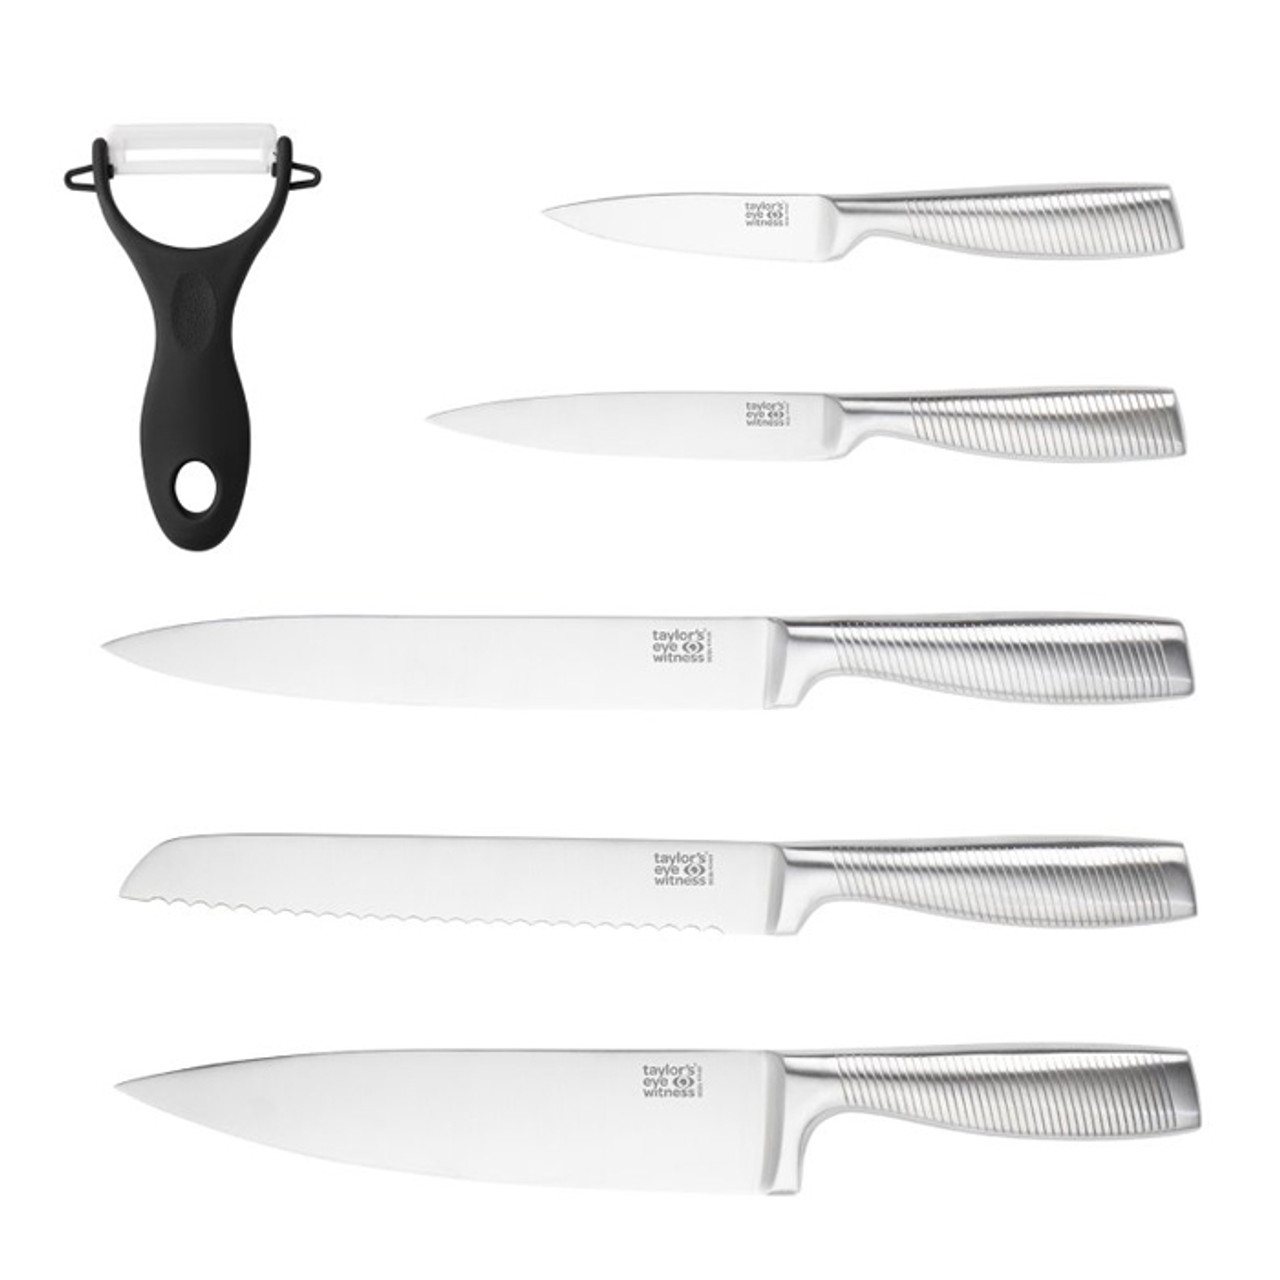 Stainless Steel 5 Piece Paring, All Purpose, Carving, Bread & 20cm Chef's Knife Set With Ceramic Vegetable Peeler